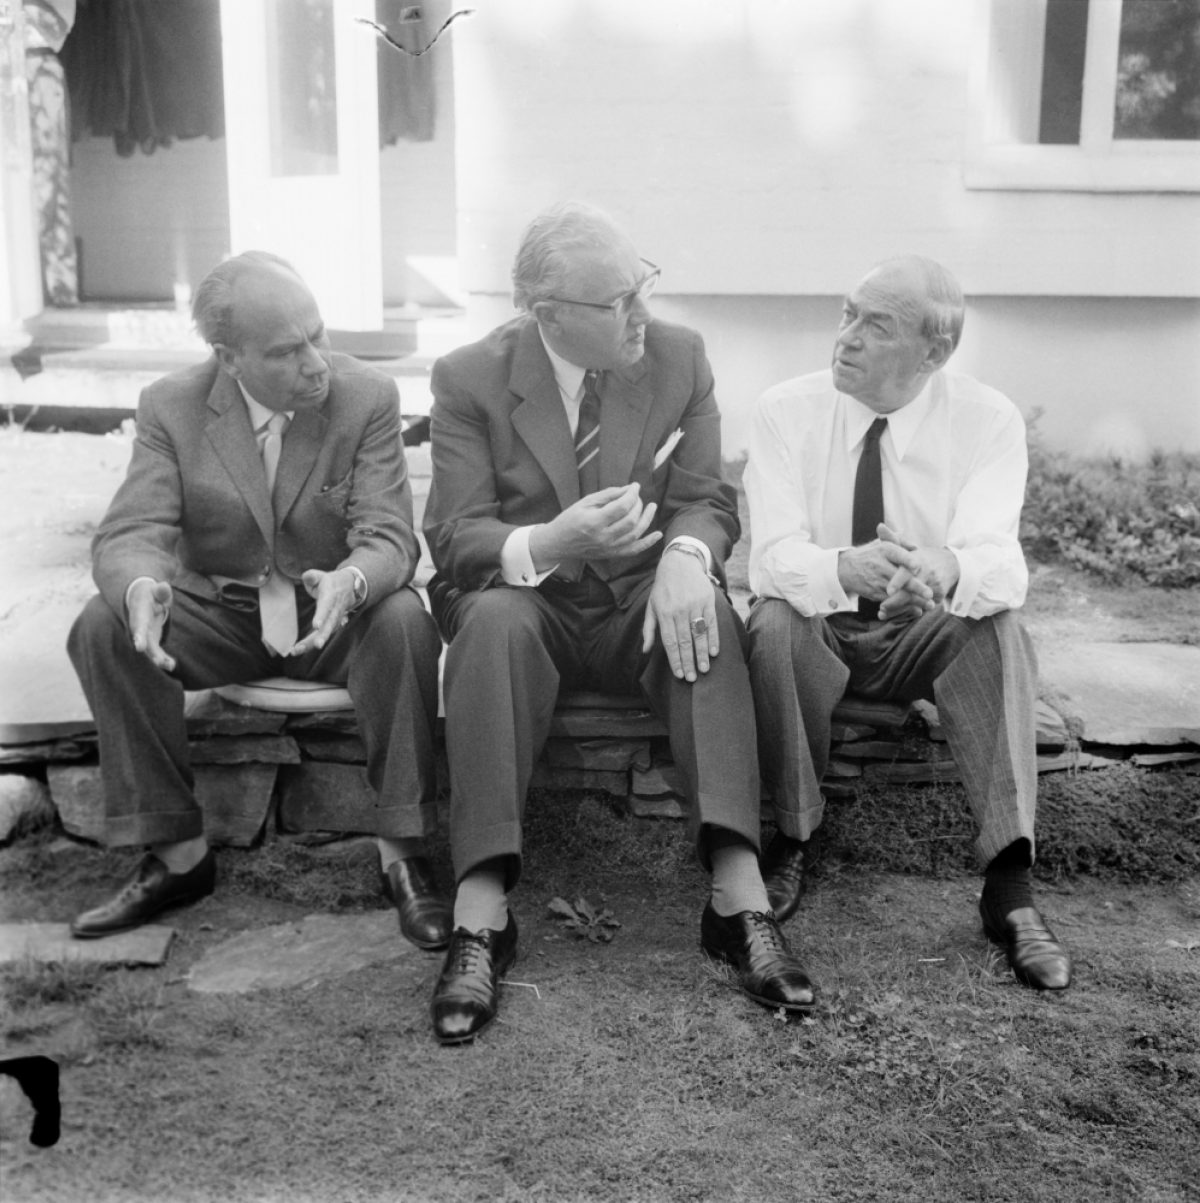 German city planners Johann Hebebrandt and Werner Hollantz visiting Alvar Aalto at his office in Munkkiniemi at the turn of the 1950s and 1960s.​ Photo: Uusi Suomi - Iltalehti / JOKA / Finnish Heritage Agency​